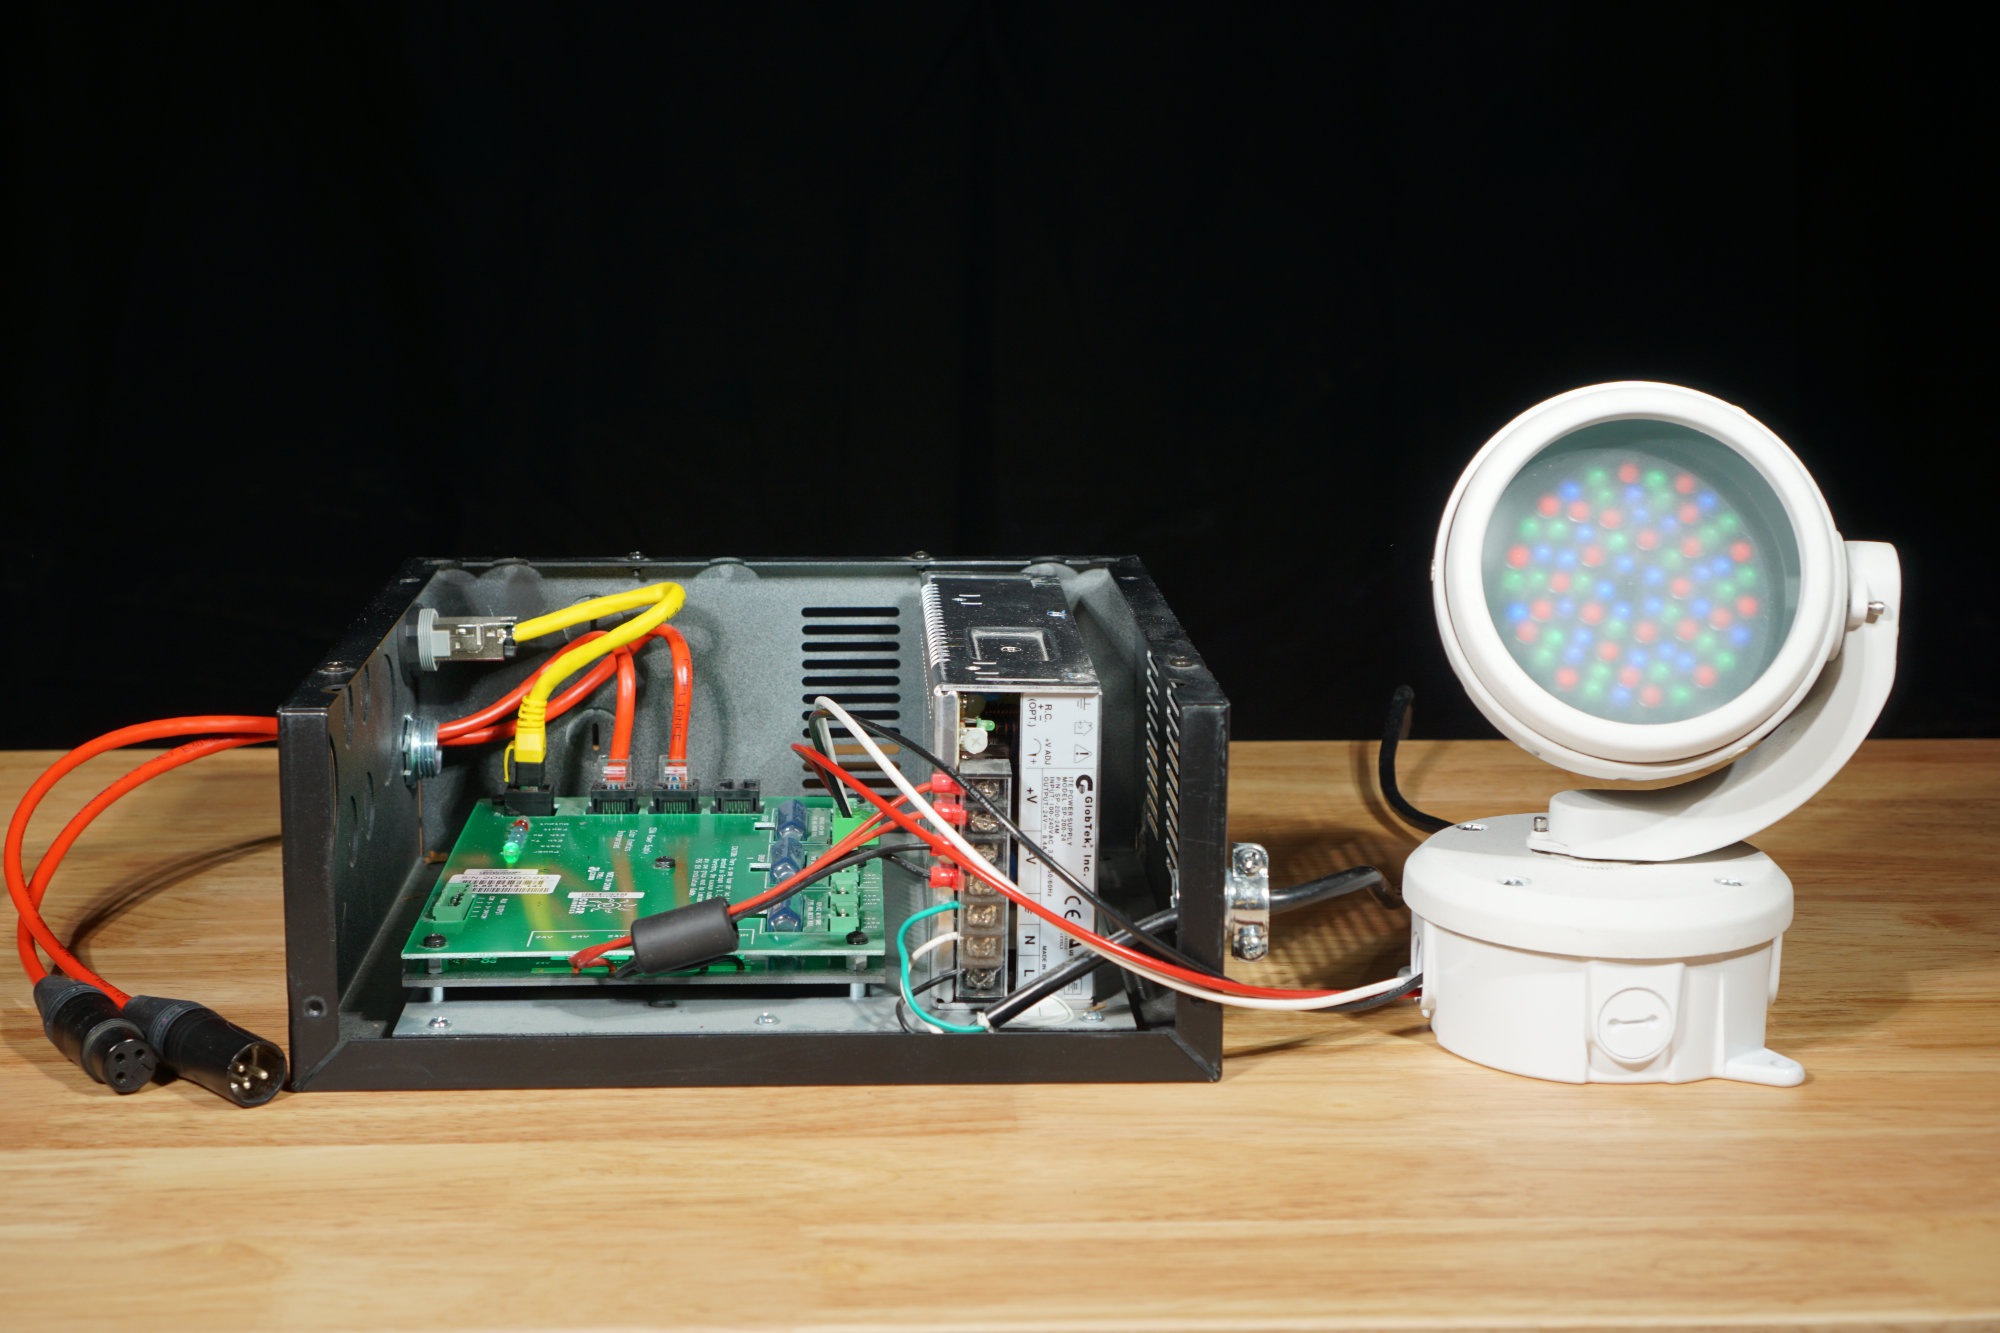 PoE-Powered RGB LED Floodlight | Photons, Electrons, and Dirt